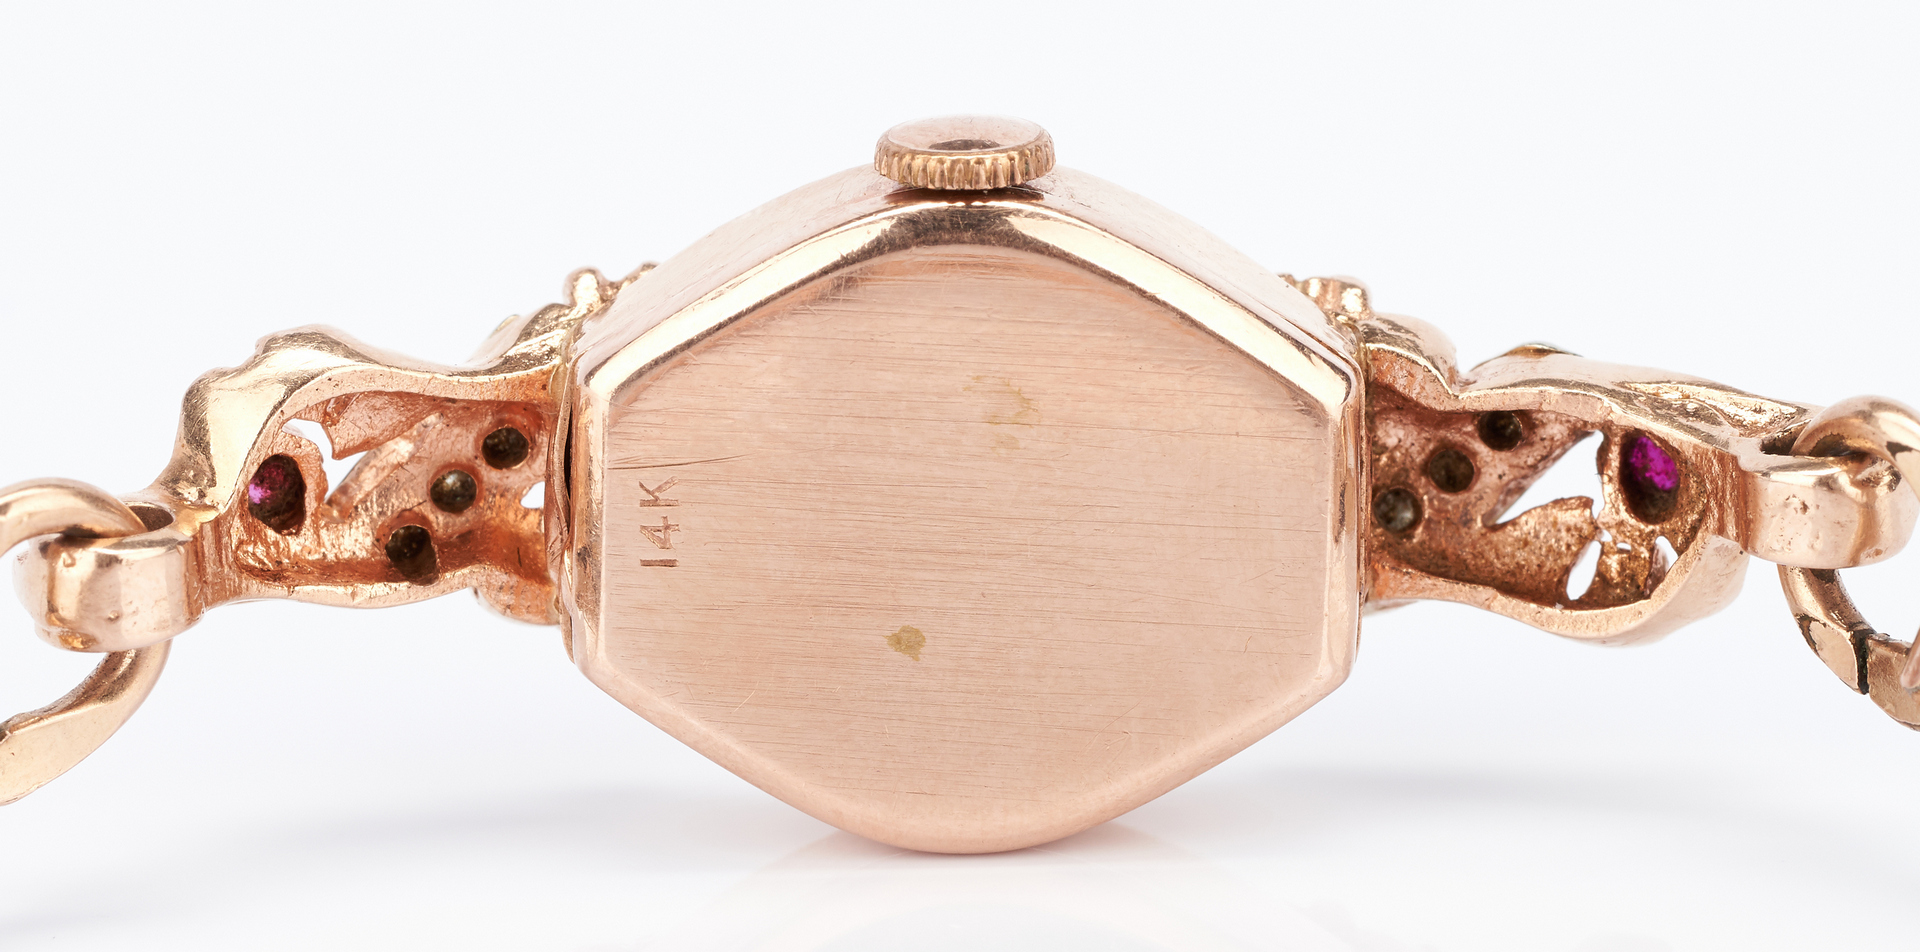 Lot 1035: 2 14K Bulova watches, one in rose gold with